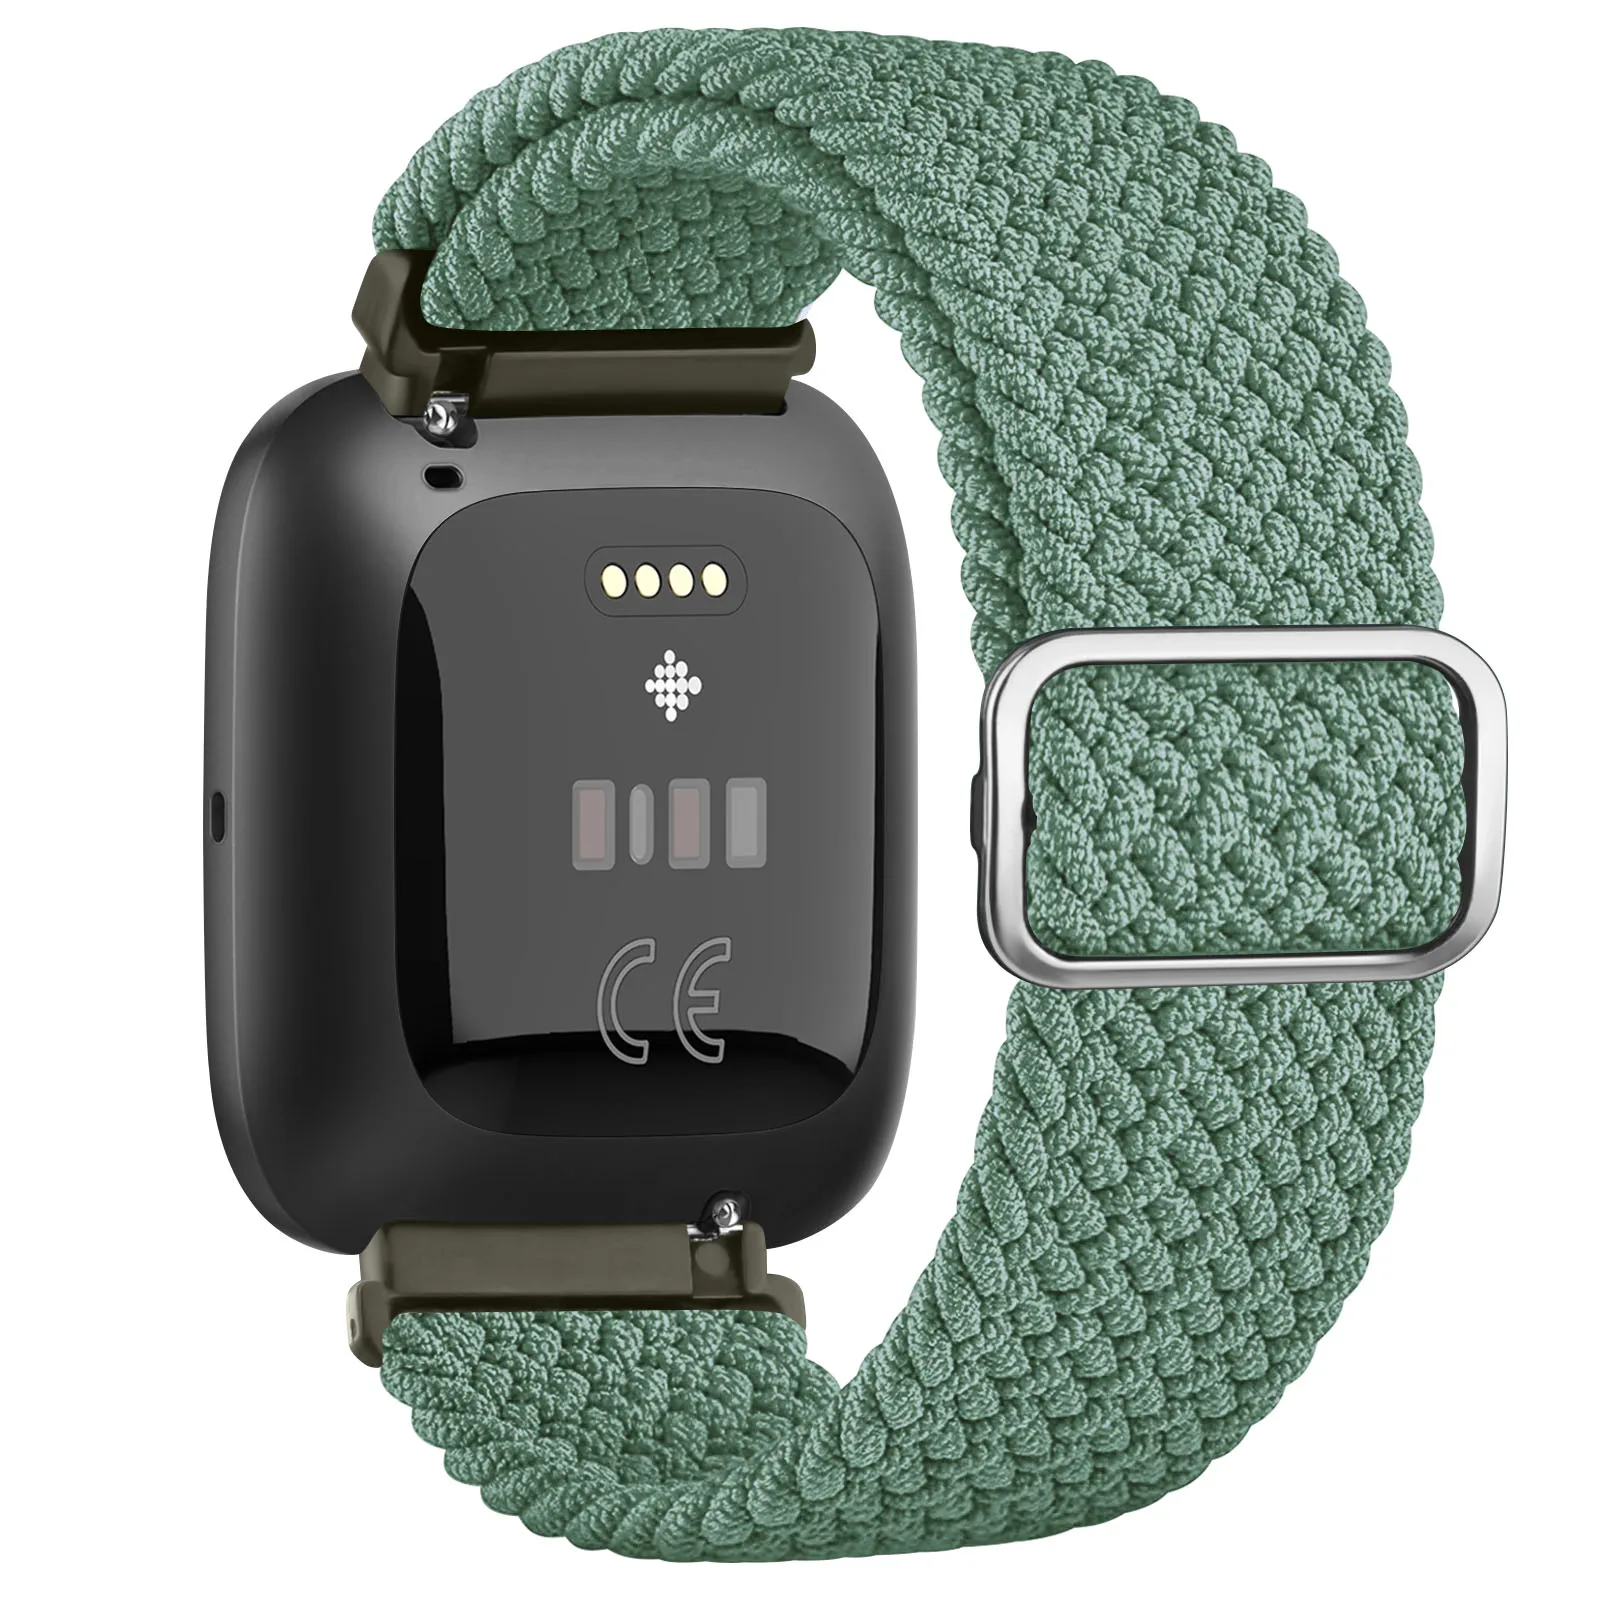 Elastic Braided Loop Band For Fitbit Versa 1/Versa 2/Versa Lite Strap Adjustable Wristband For Fitbit Versa Special Edtion Band